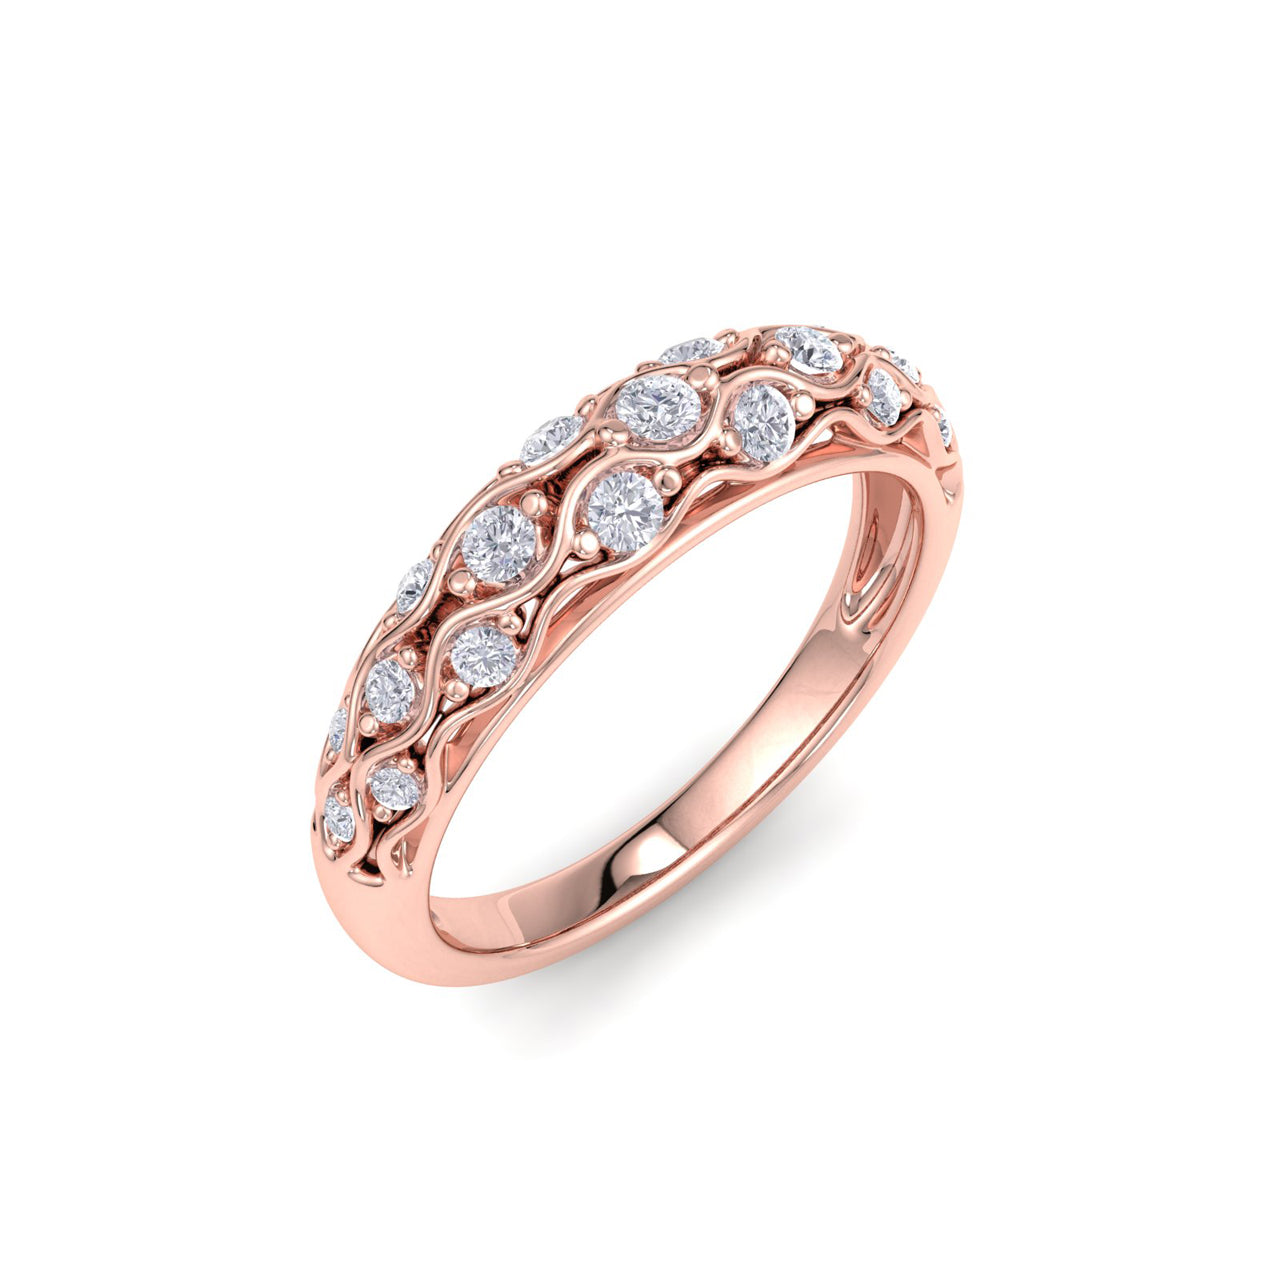 Petite rolled pavé ring in rose gold with white diamonds of 0.29 ct in weight